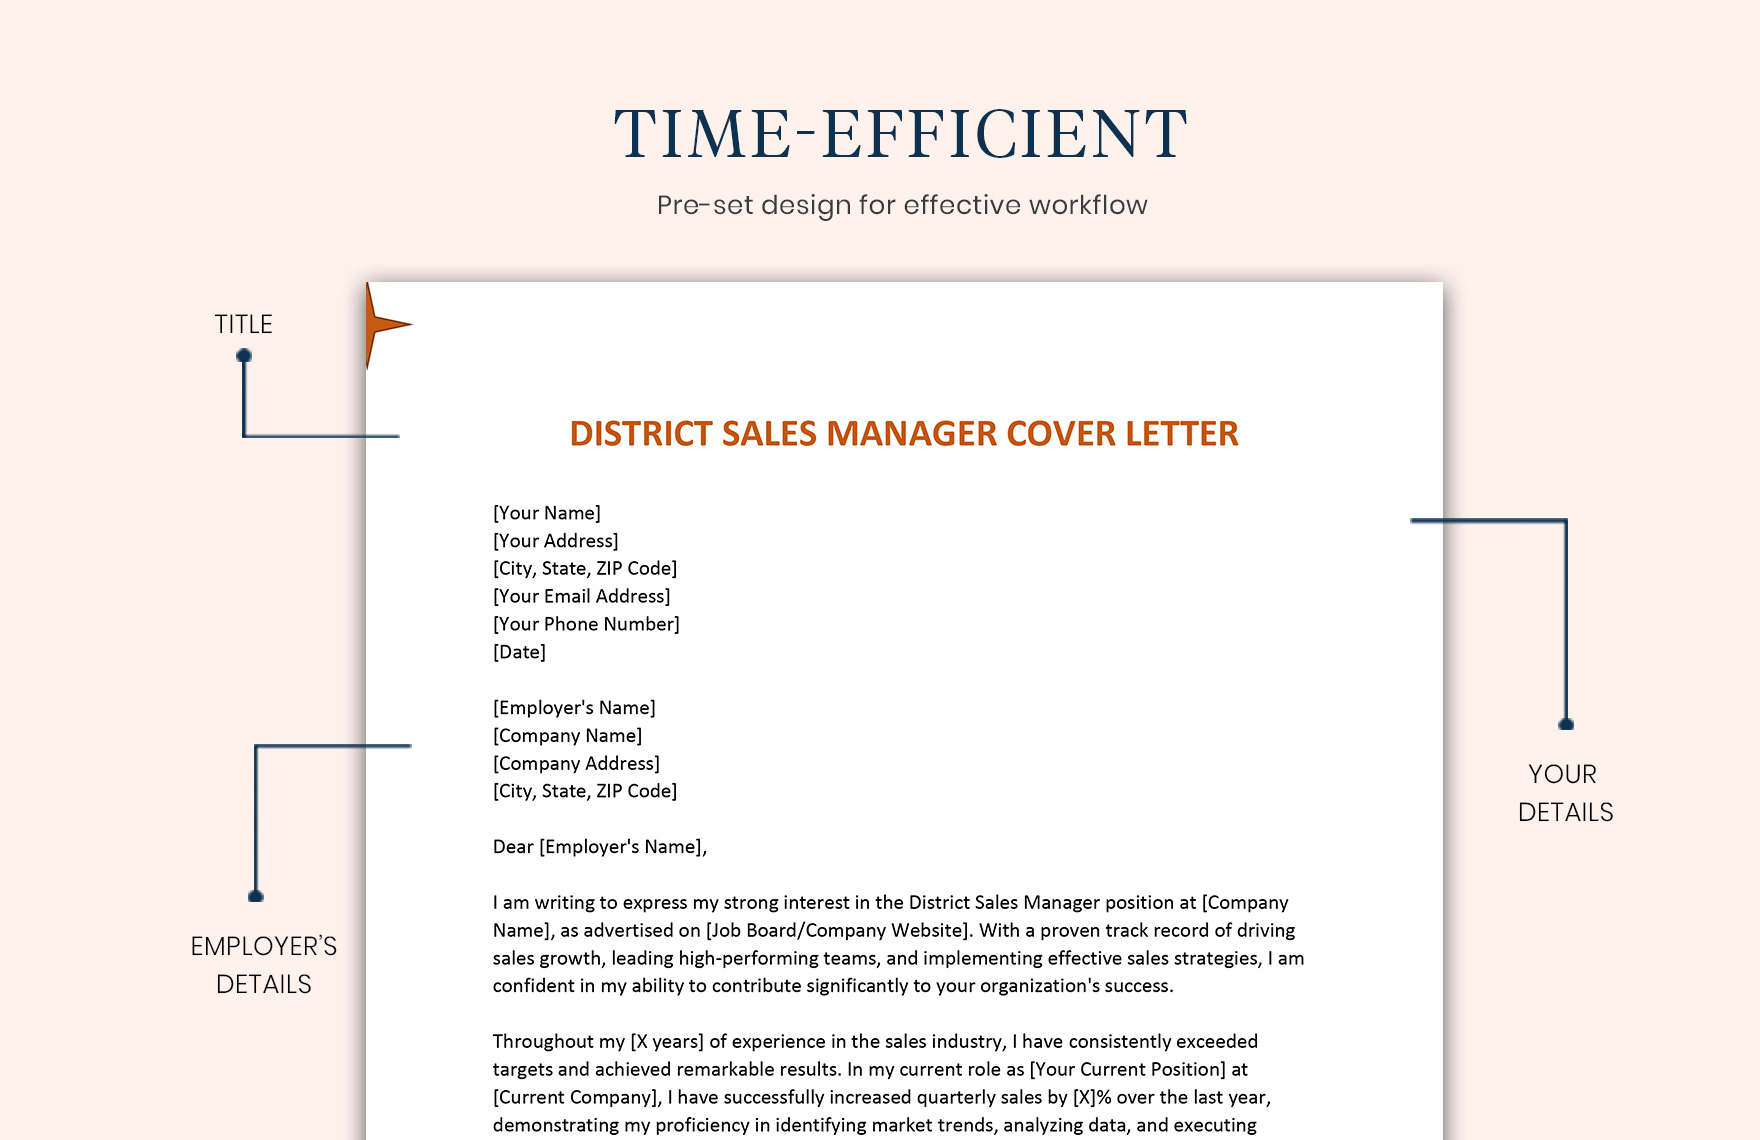 District Sales Manager Cover Letter